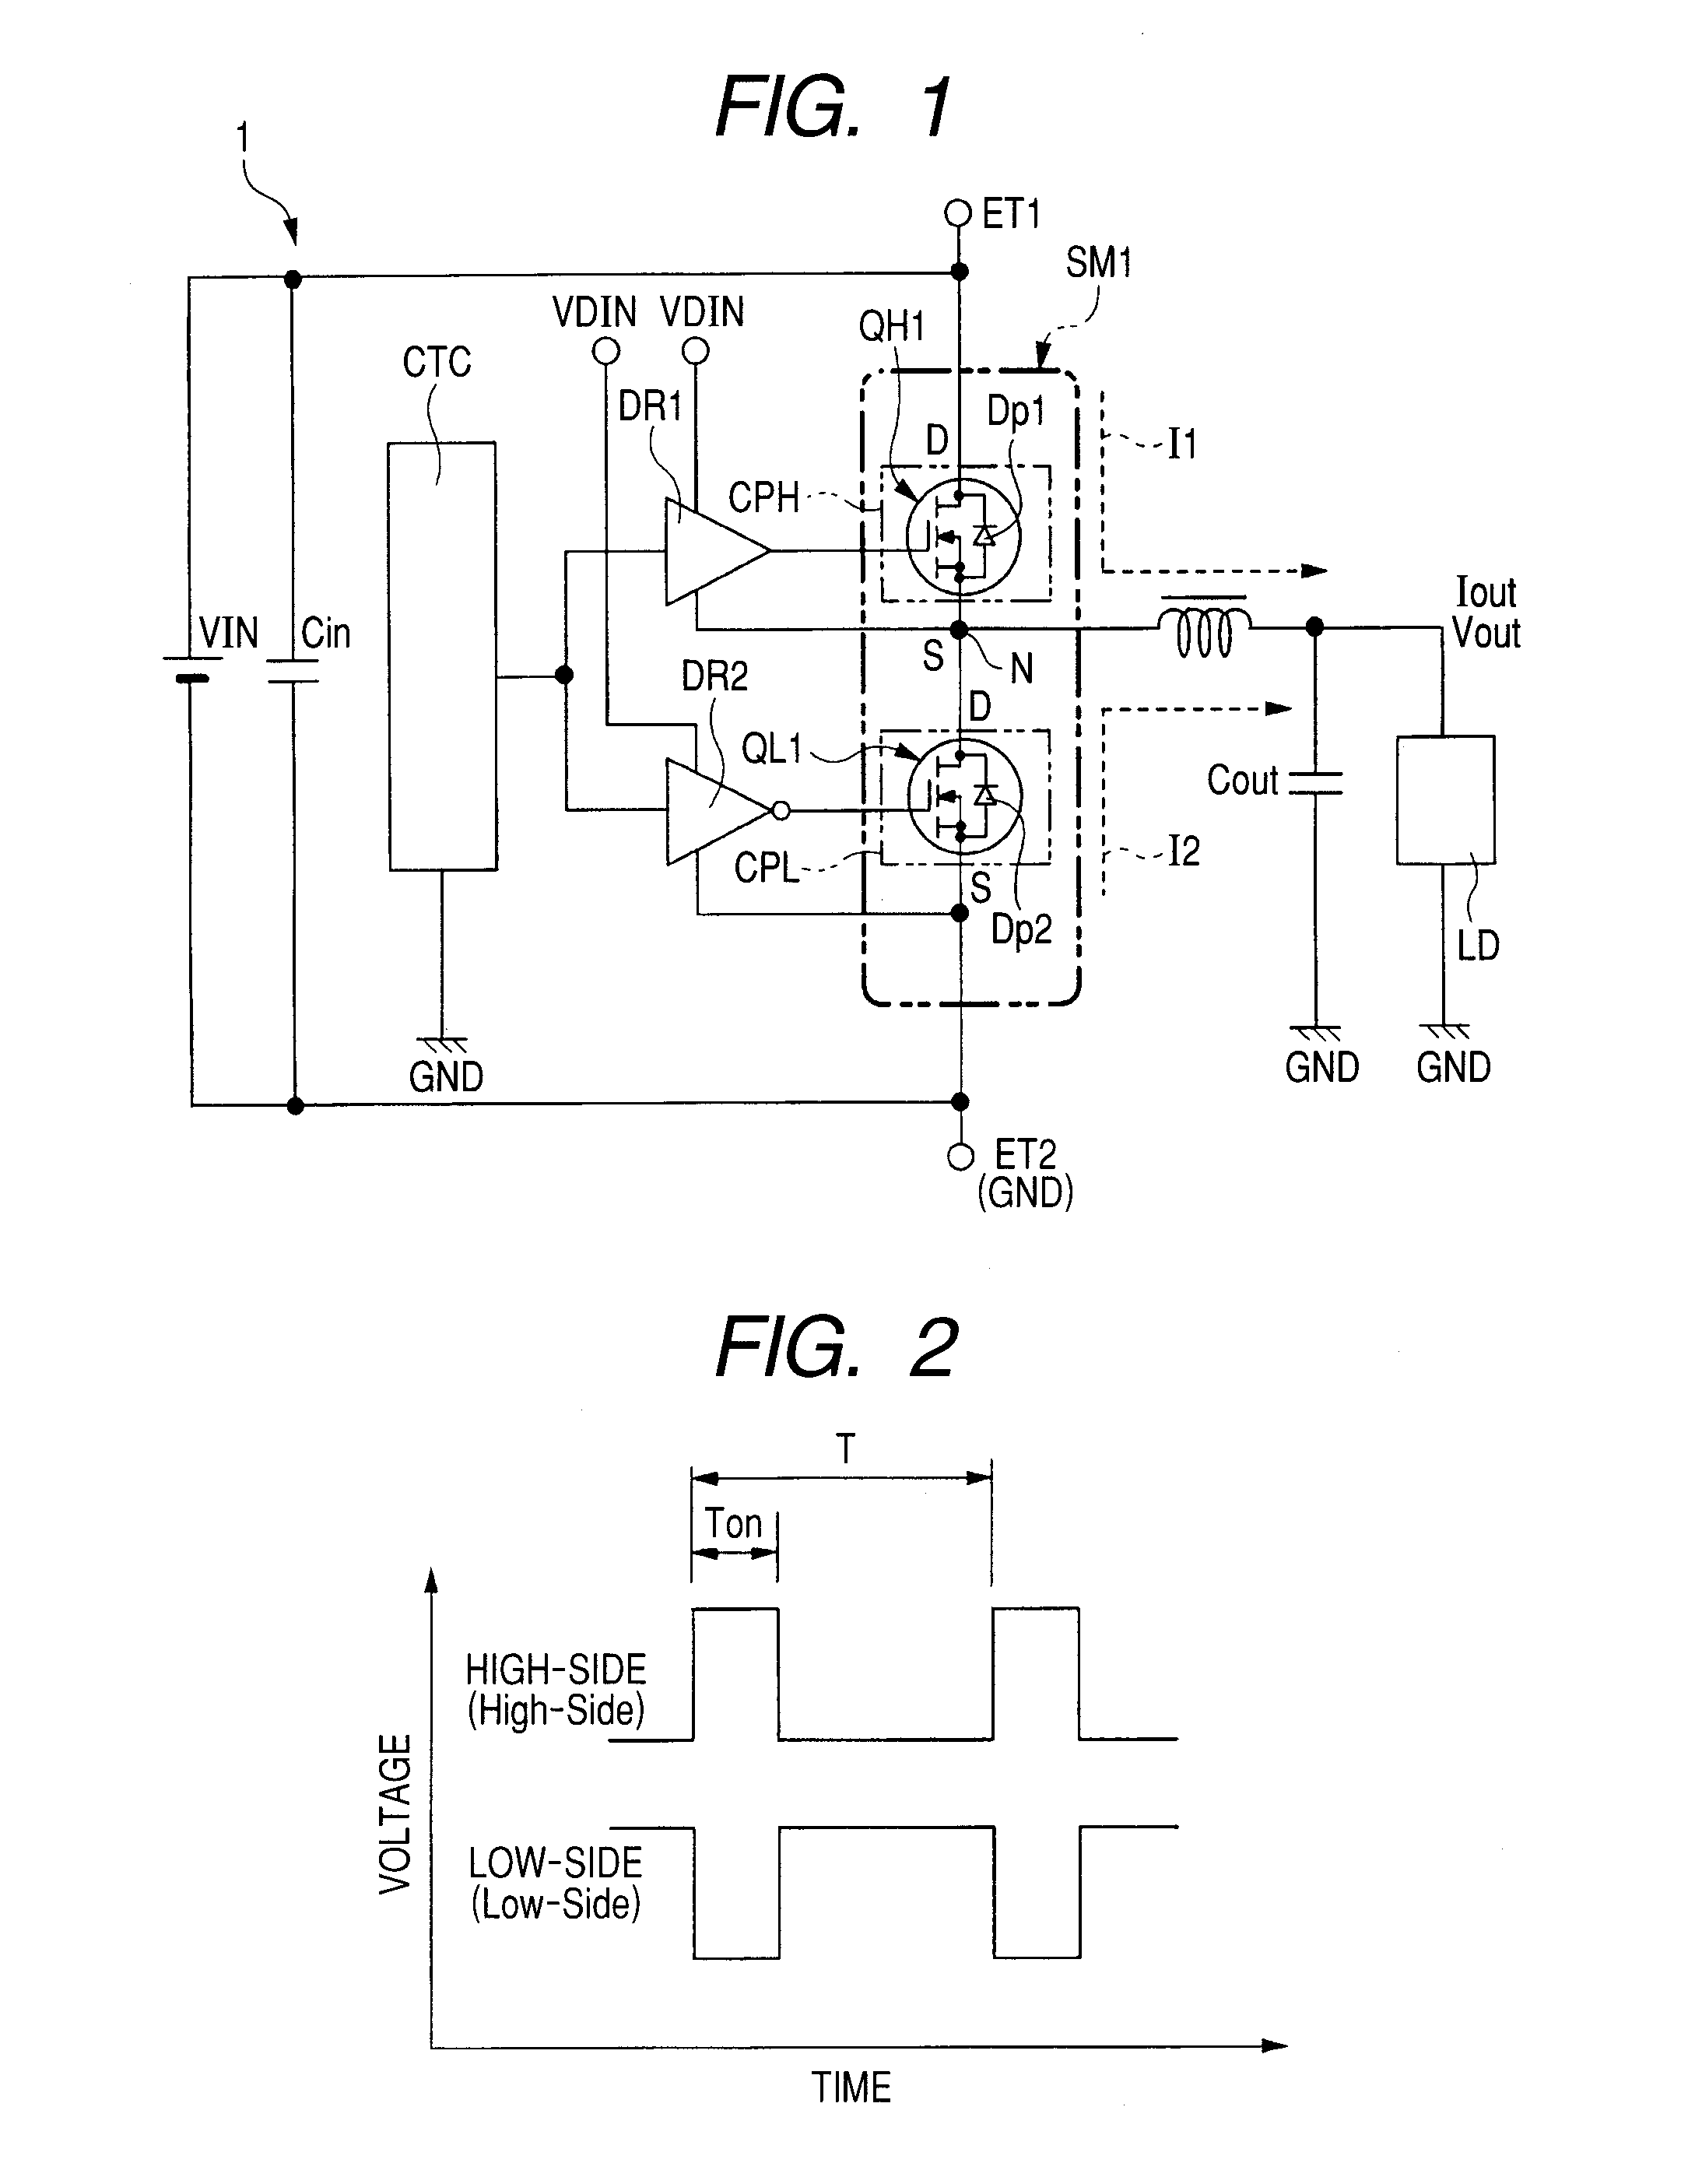 Manufacturing method for semiconductor devices